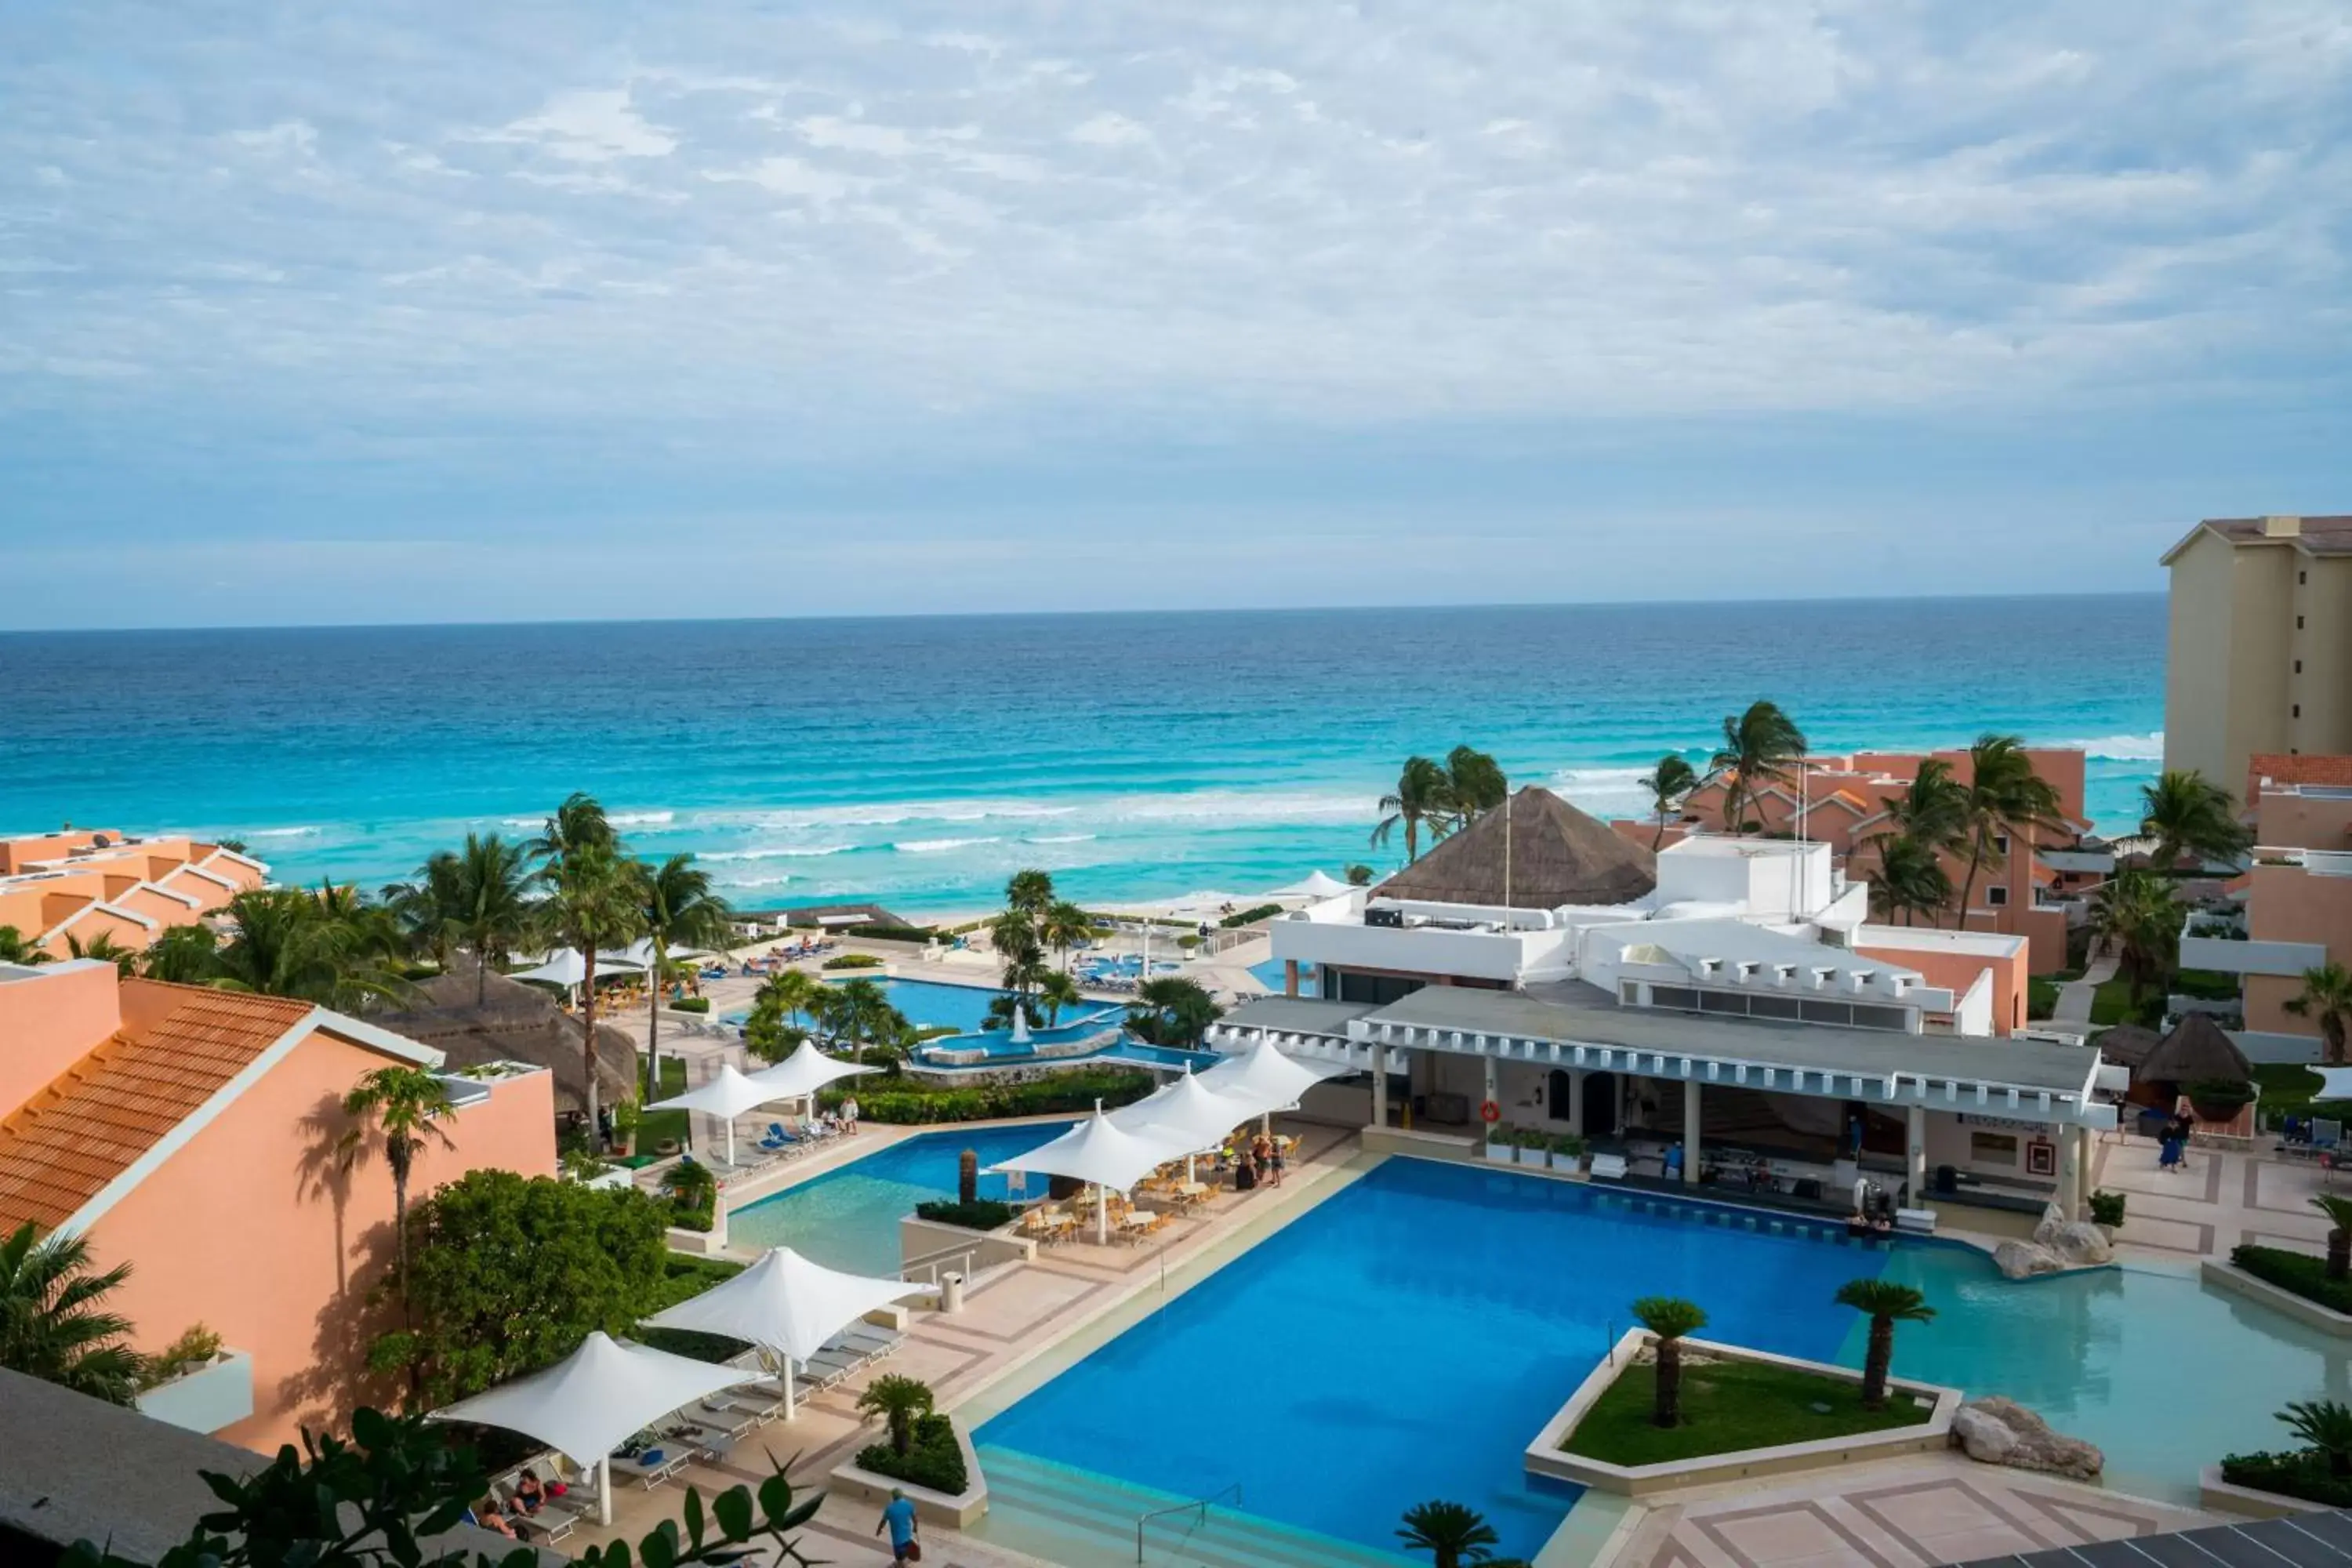 Property building, Pool View in Wyndham Grand Cancun All Inclusive Resort & Villas